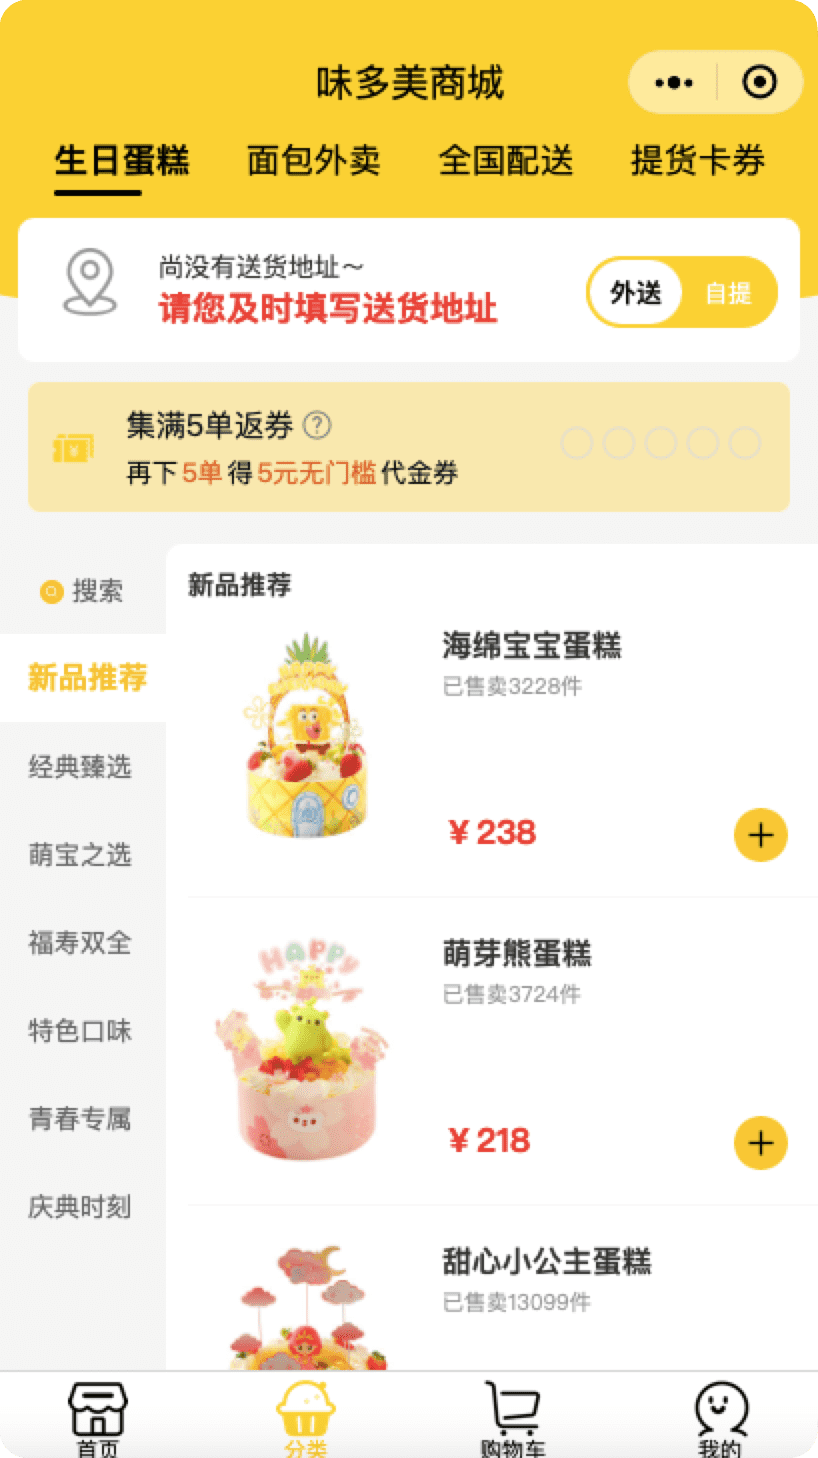 Users can check the menu and order on the WeiDuoMei Mini Program to save wait time significantly